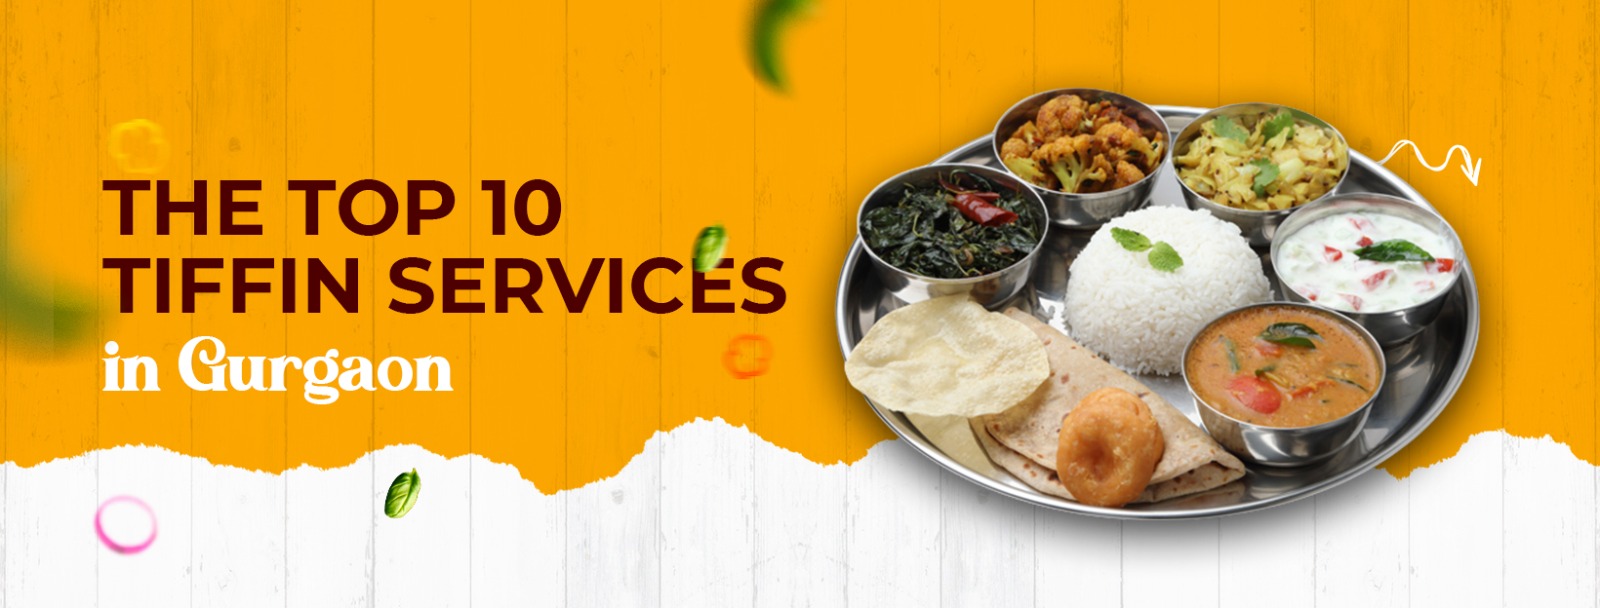 The Top 10 Tiffin Services in Gurgaon